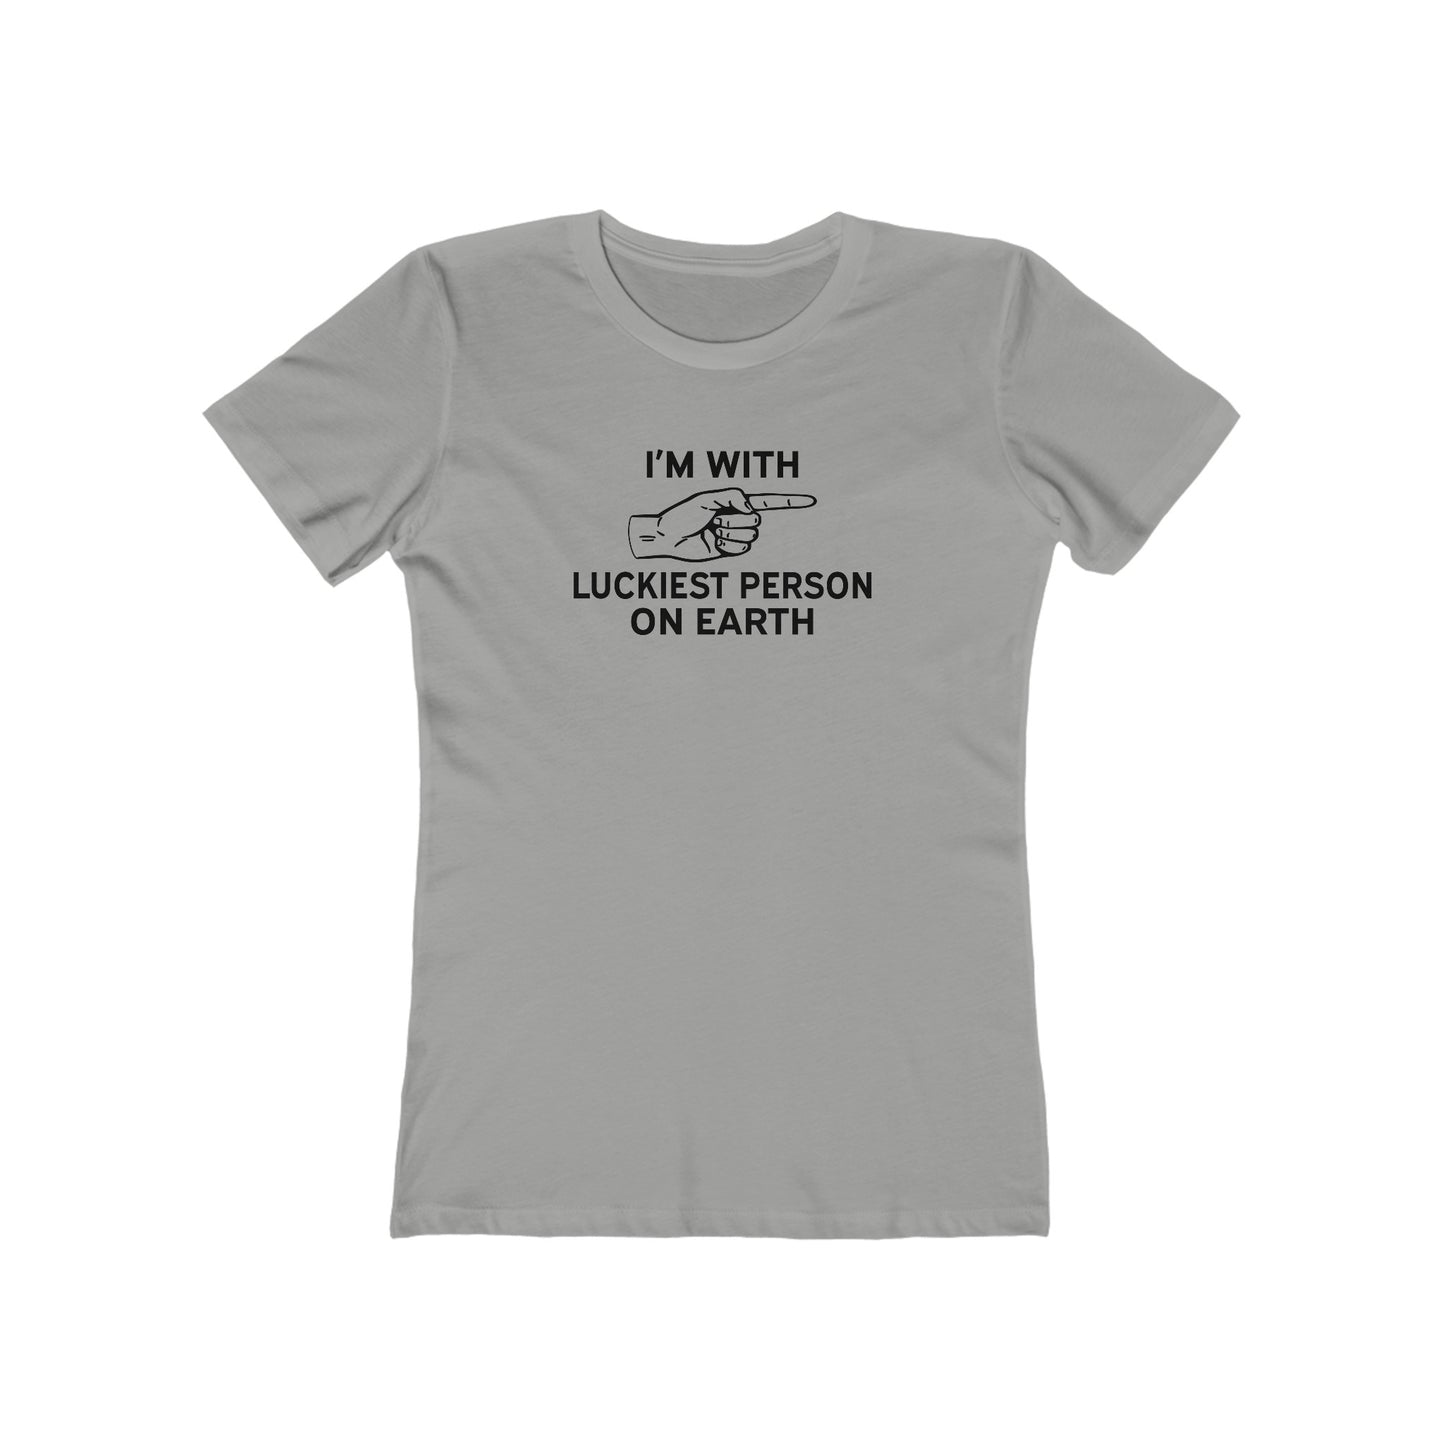 I'm With Luckiest Person on Earth - Women's T-Shirt